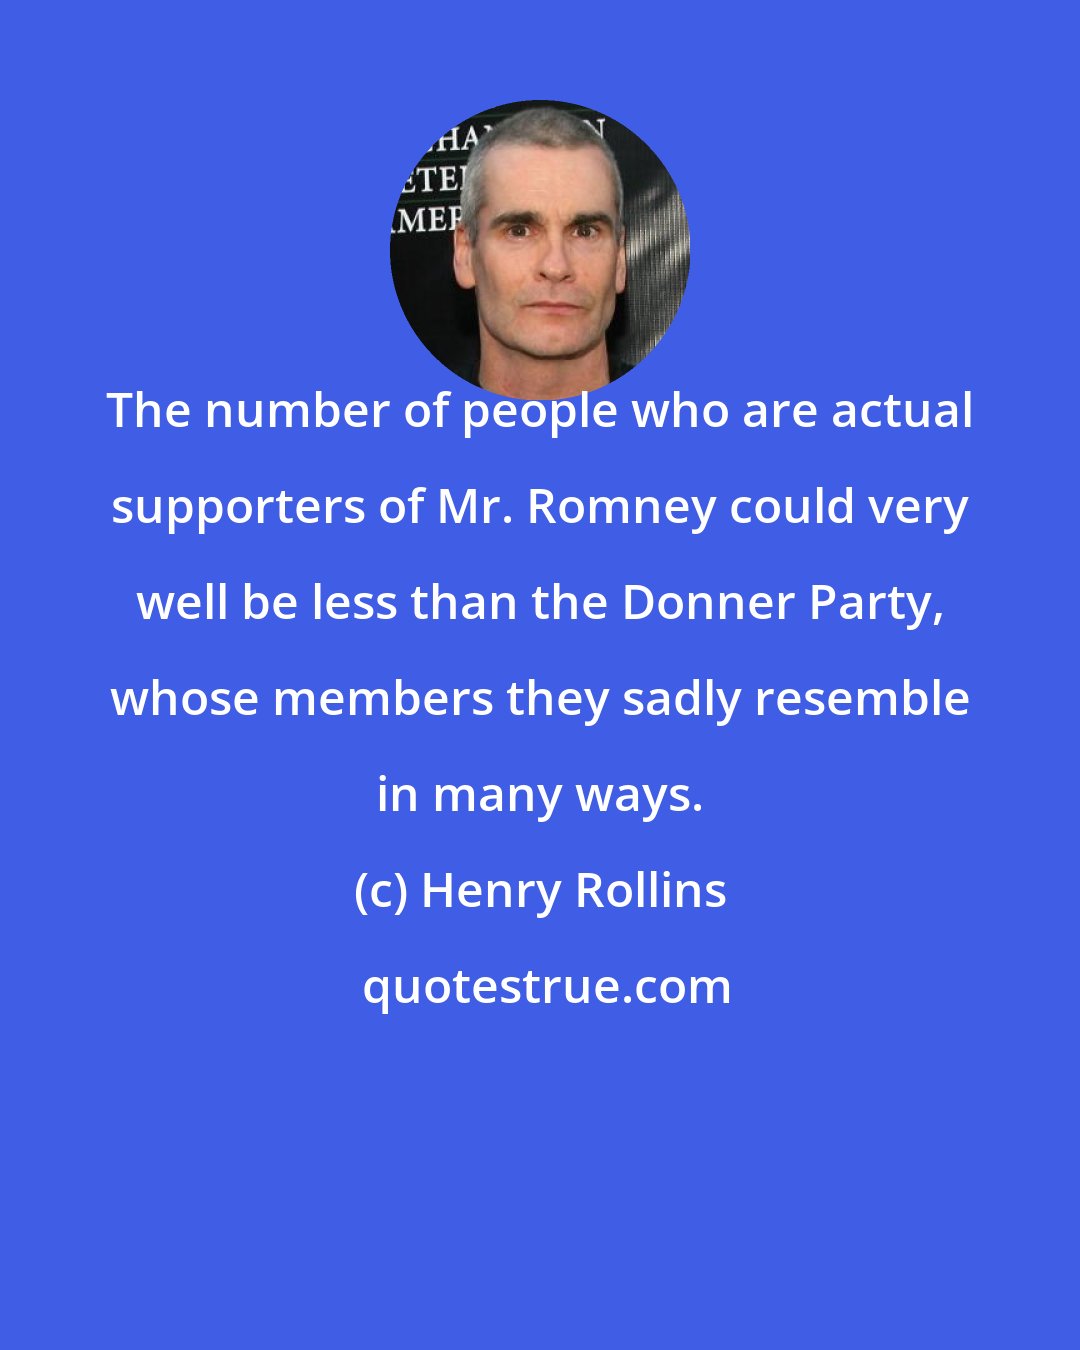 Henry Rollins: The number of people who are actual supporters of Mr. Romney could very well be less than the Donner Party, whose members they sadly resemble in many ways.